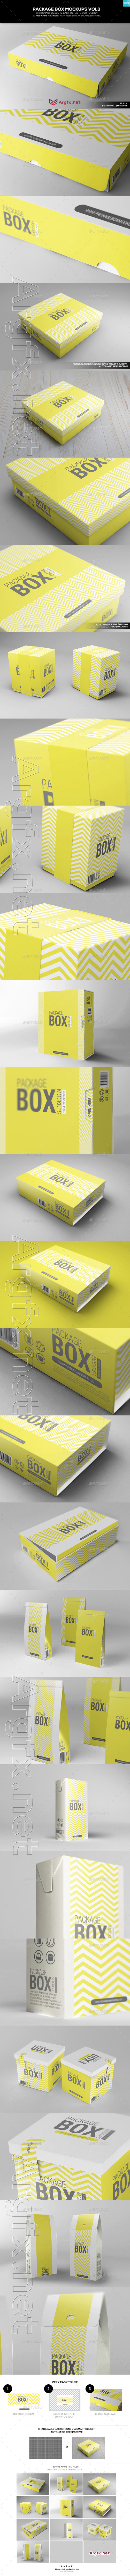  GraphicRiver - Package Box Mockups Vol3 8797989